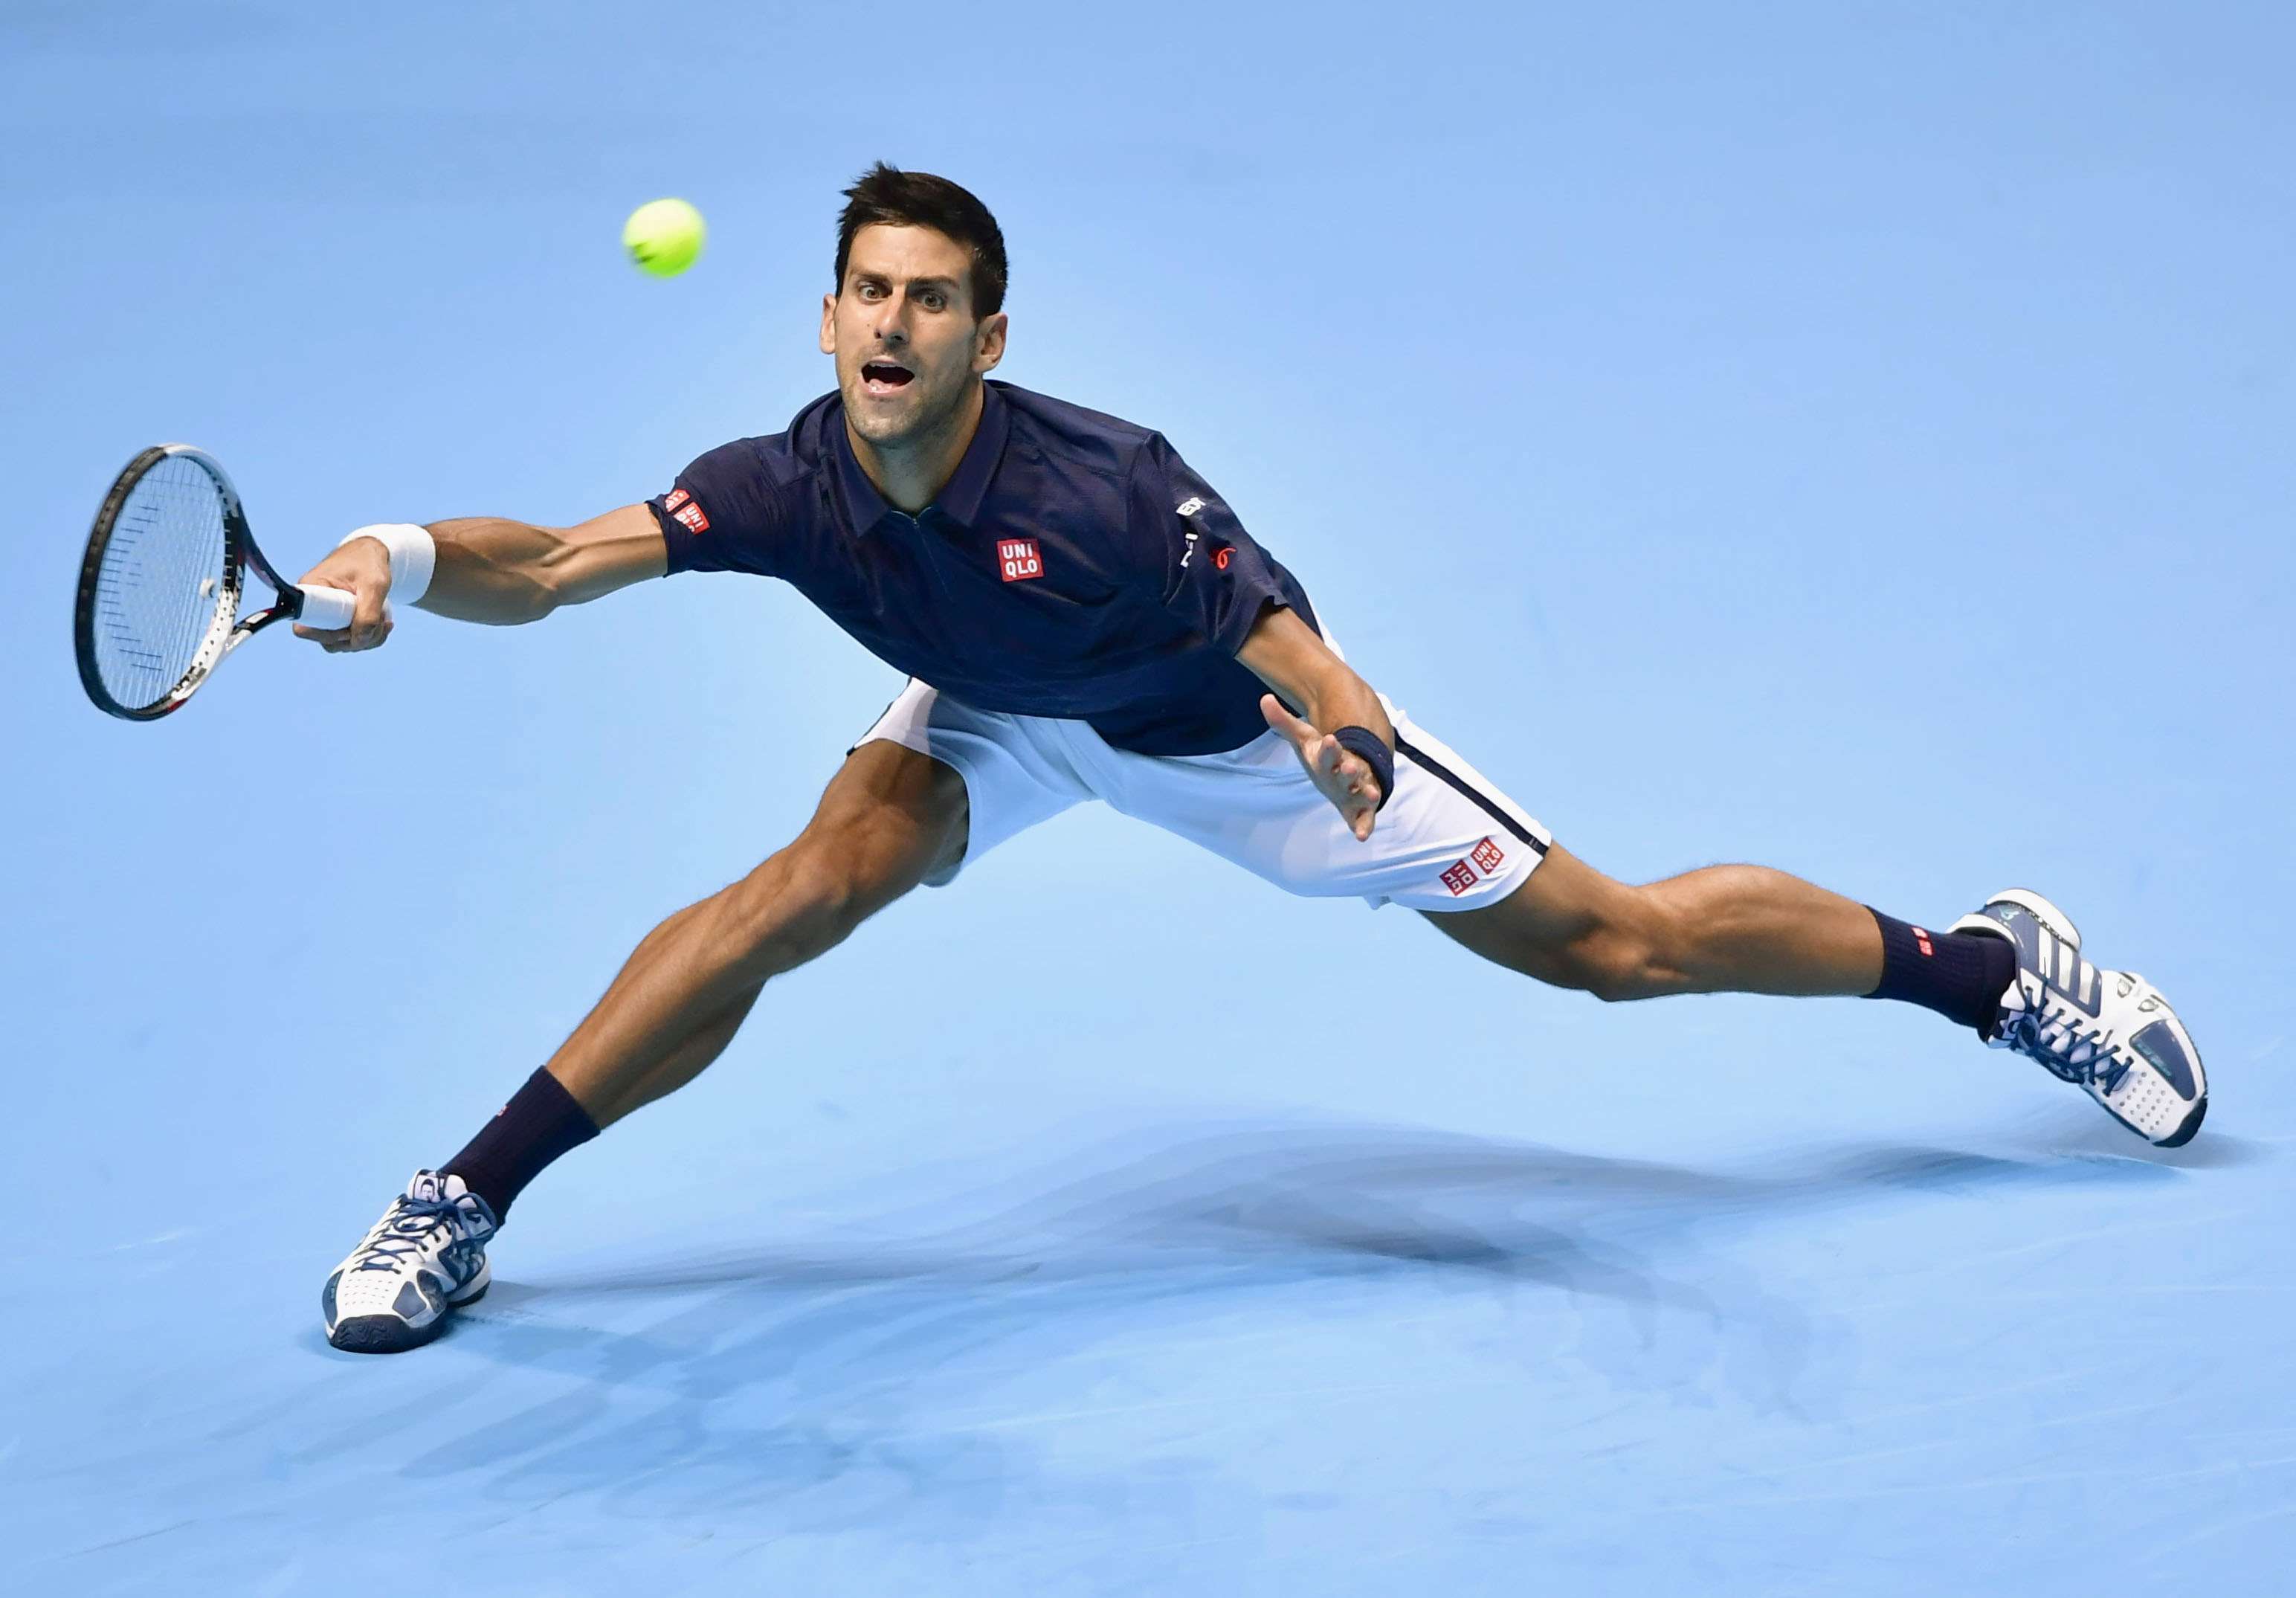 Novak Djokovic of Serbia faces off against Milos Raonic of Canada during an ATP World Tour Finals match in London on Nov. 15, 2016. Djokovic won 7-6, 7-6. (Kyodo) ==Kyodo